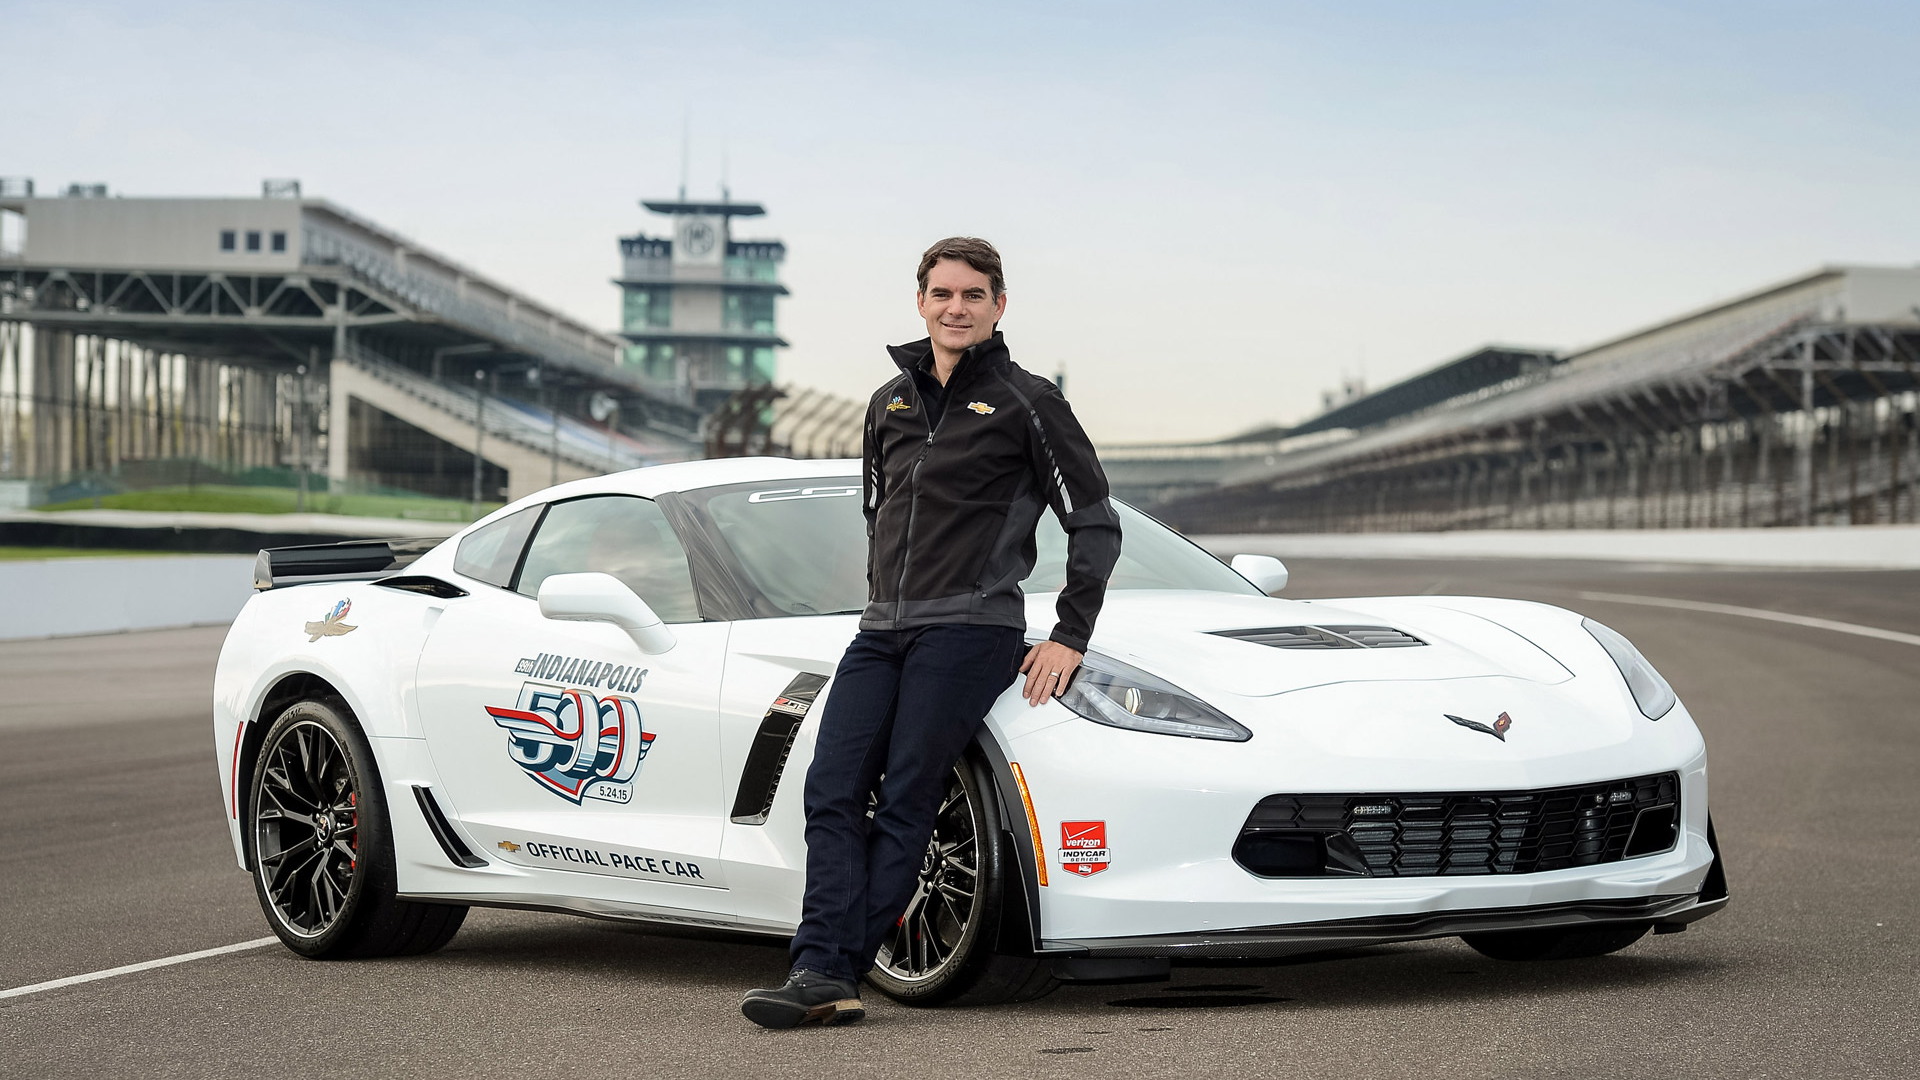 Jeff Gordon and the Chevrolet Corvette Z06 pace car for the 2015 Indianapolis 500